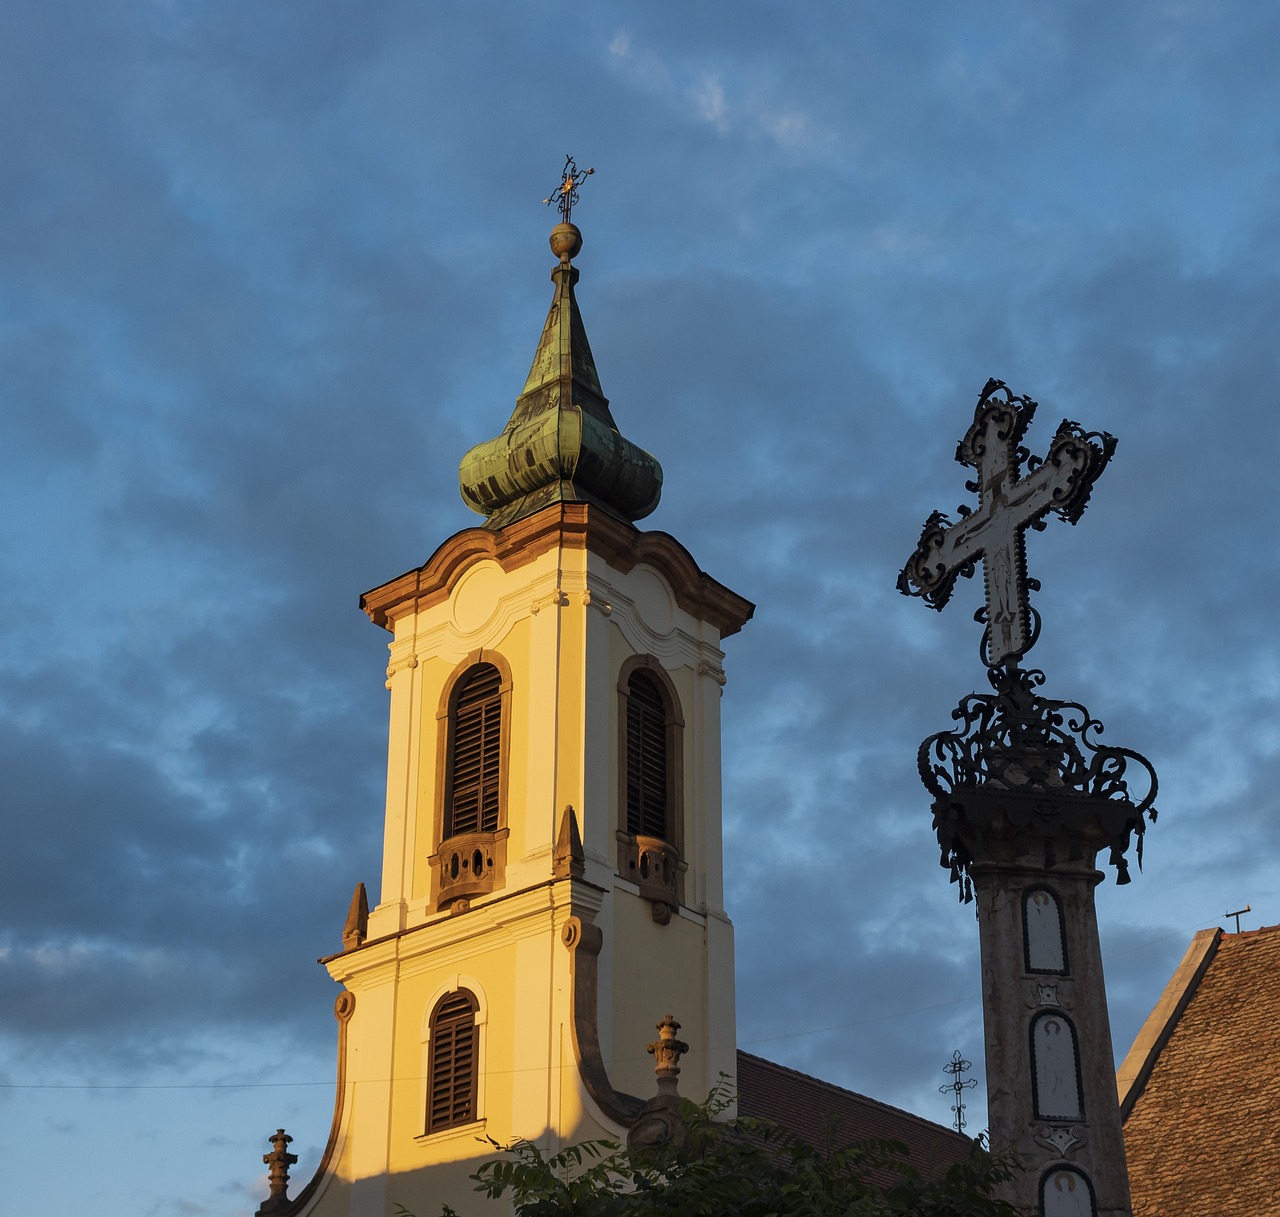 A Day of Art and Culture in Szentendre